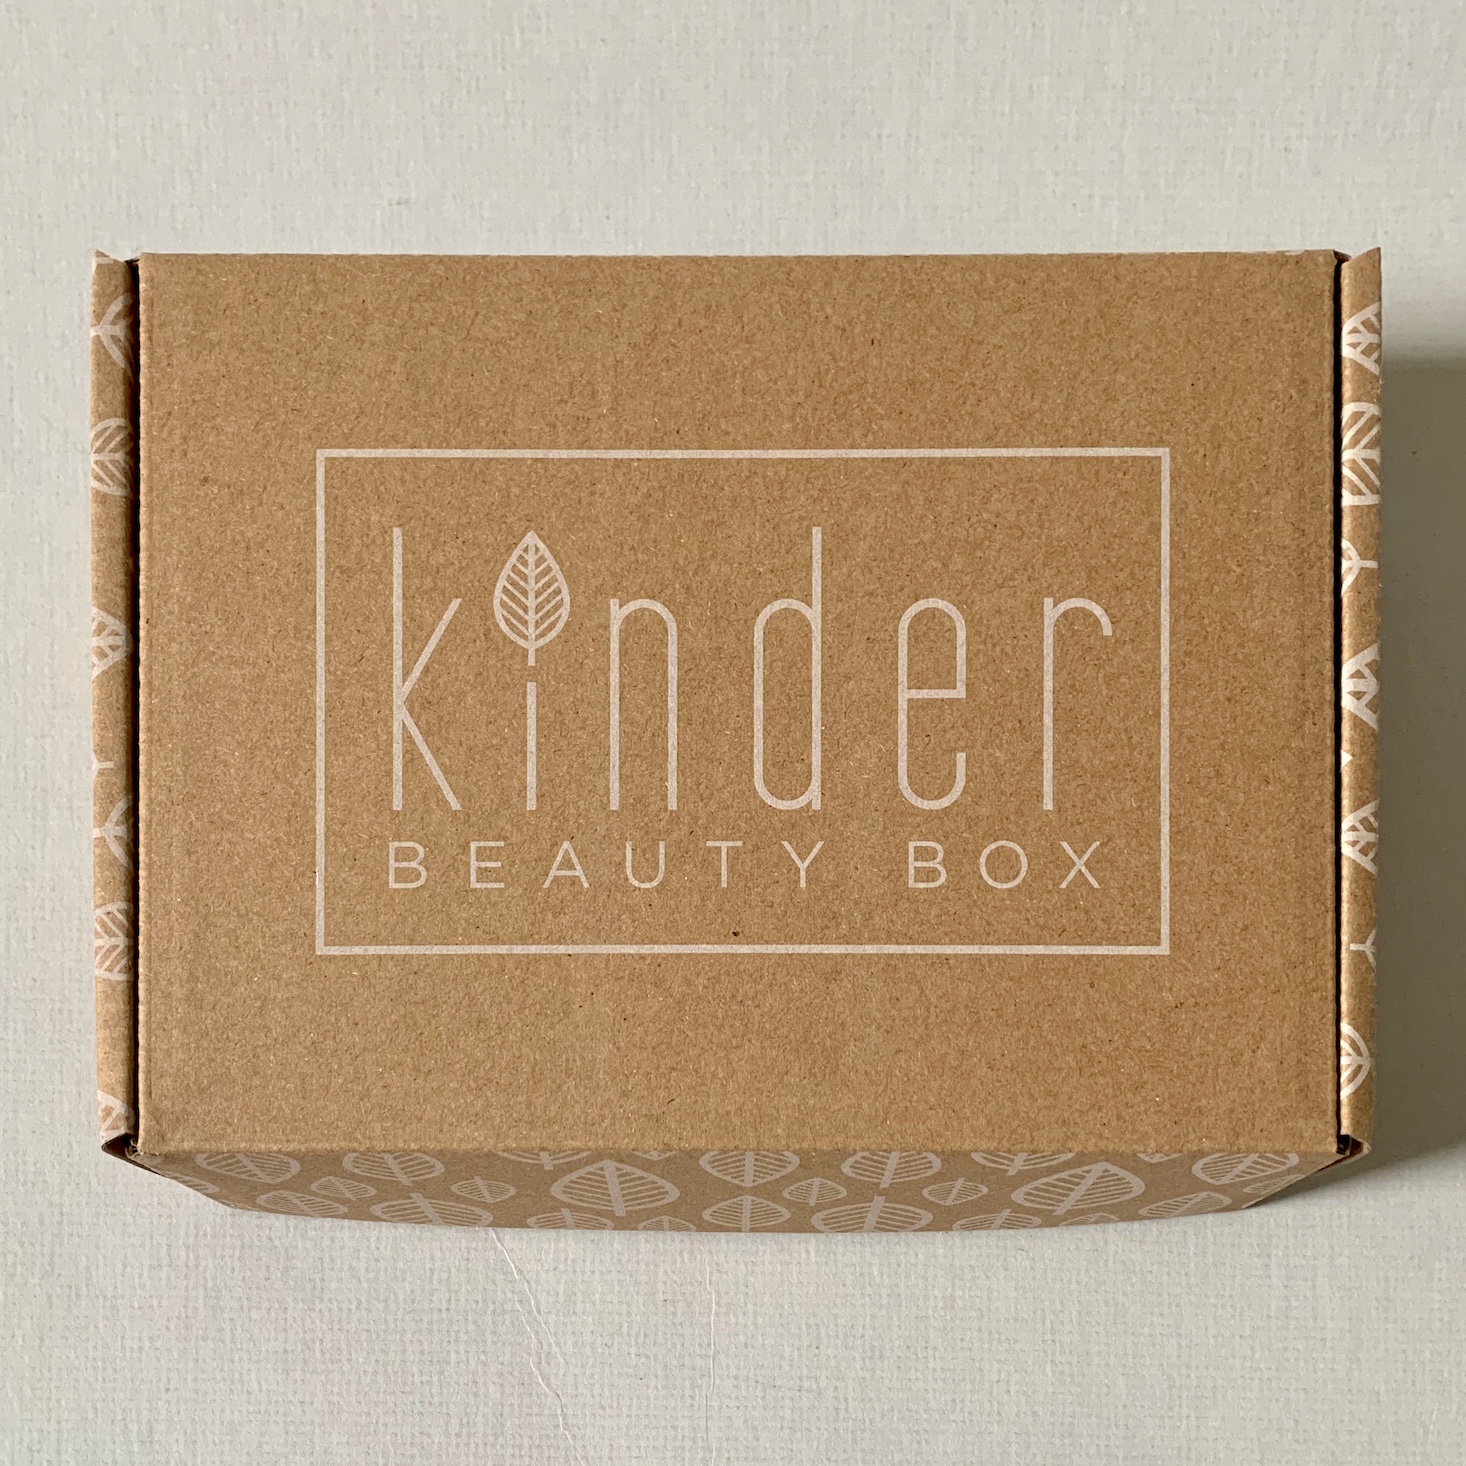 Kinder Beauty Box Review + Coupon – Faves Collection Box